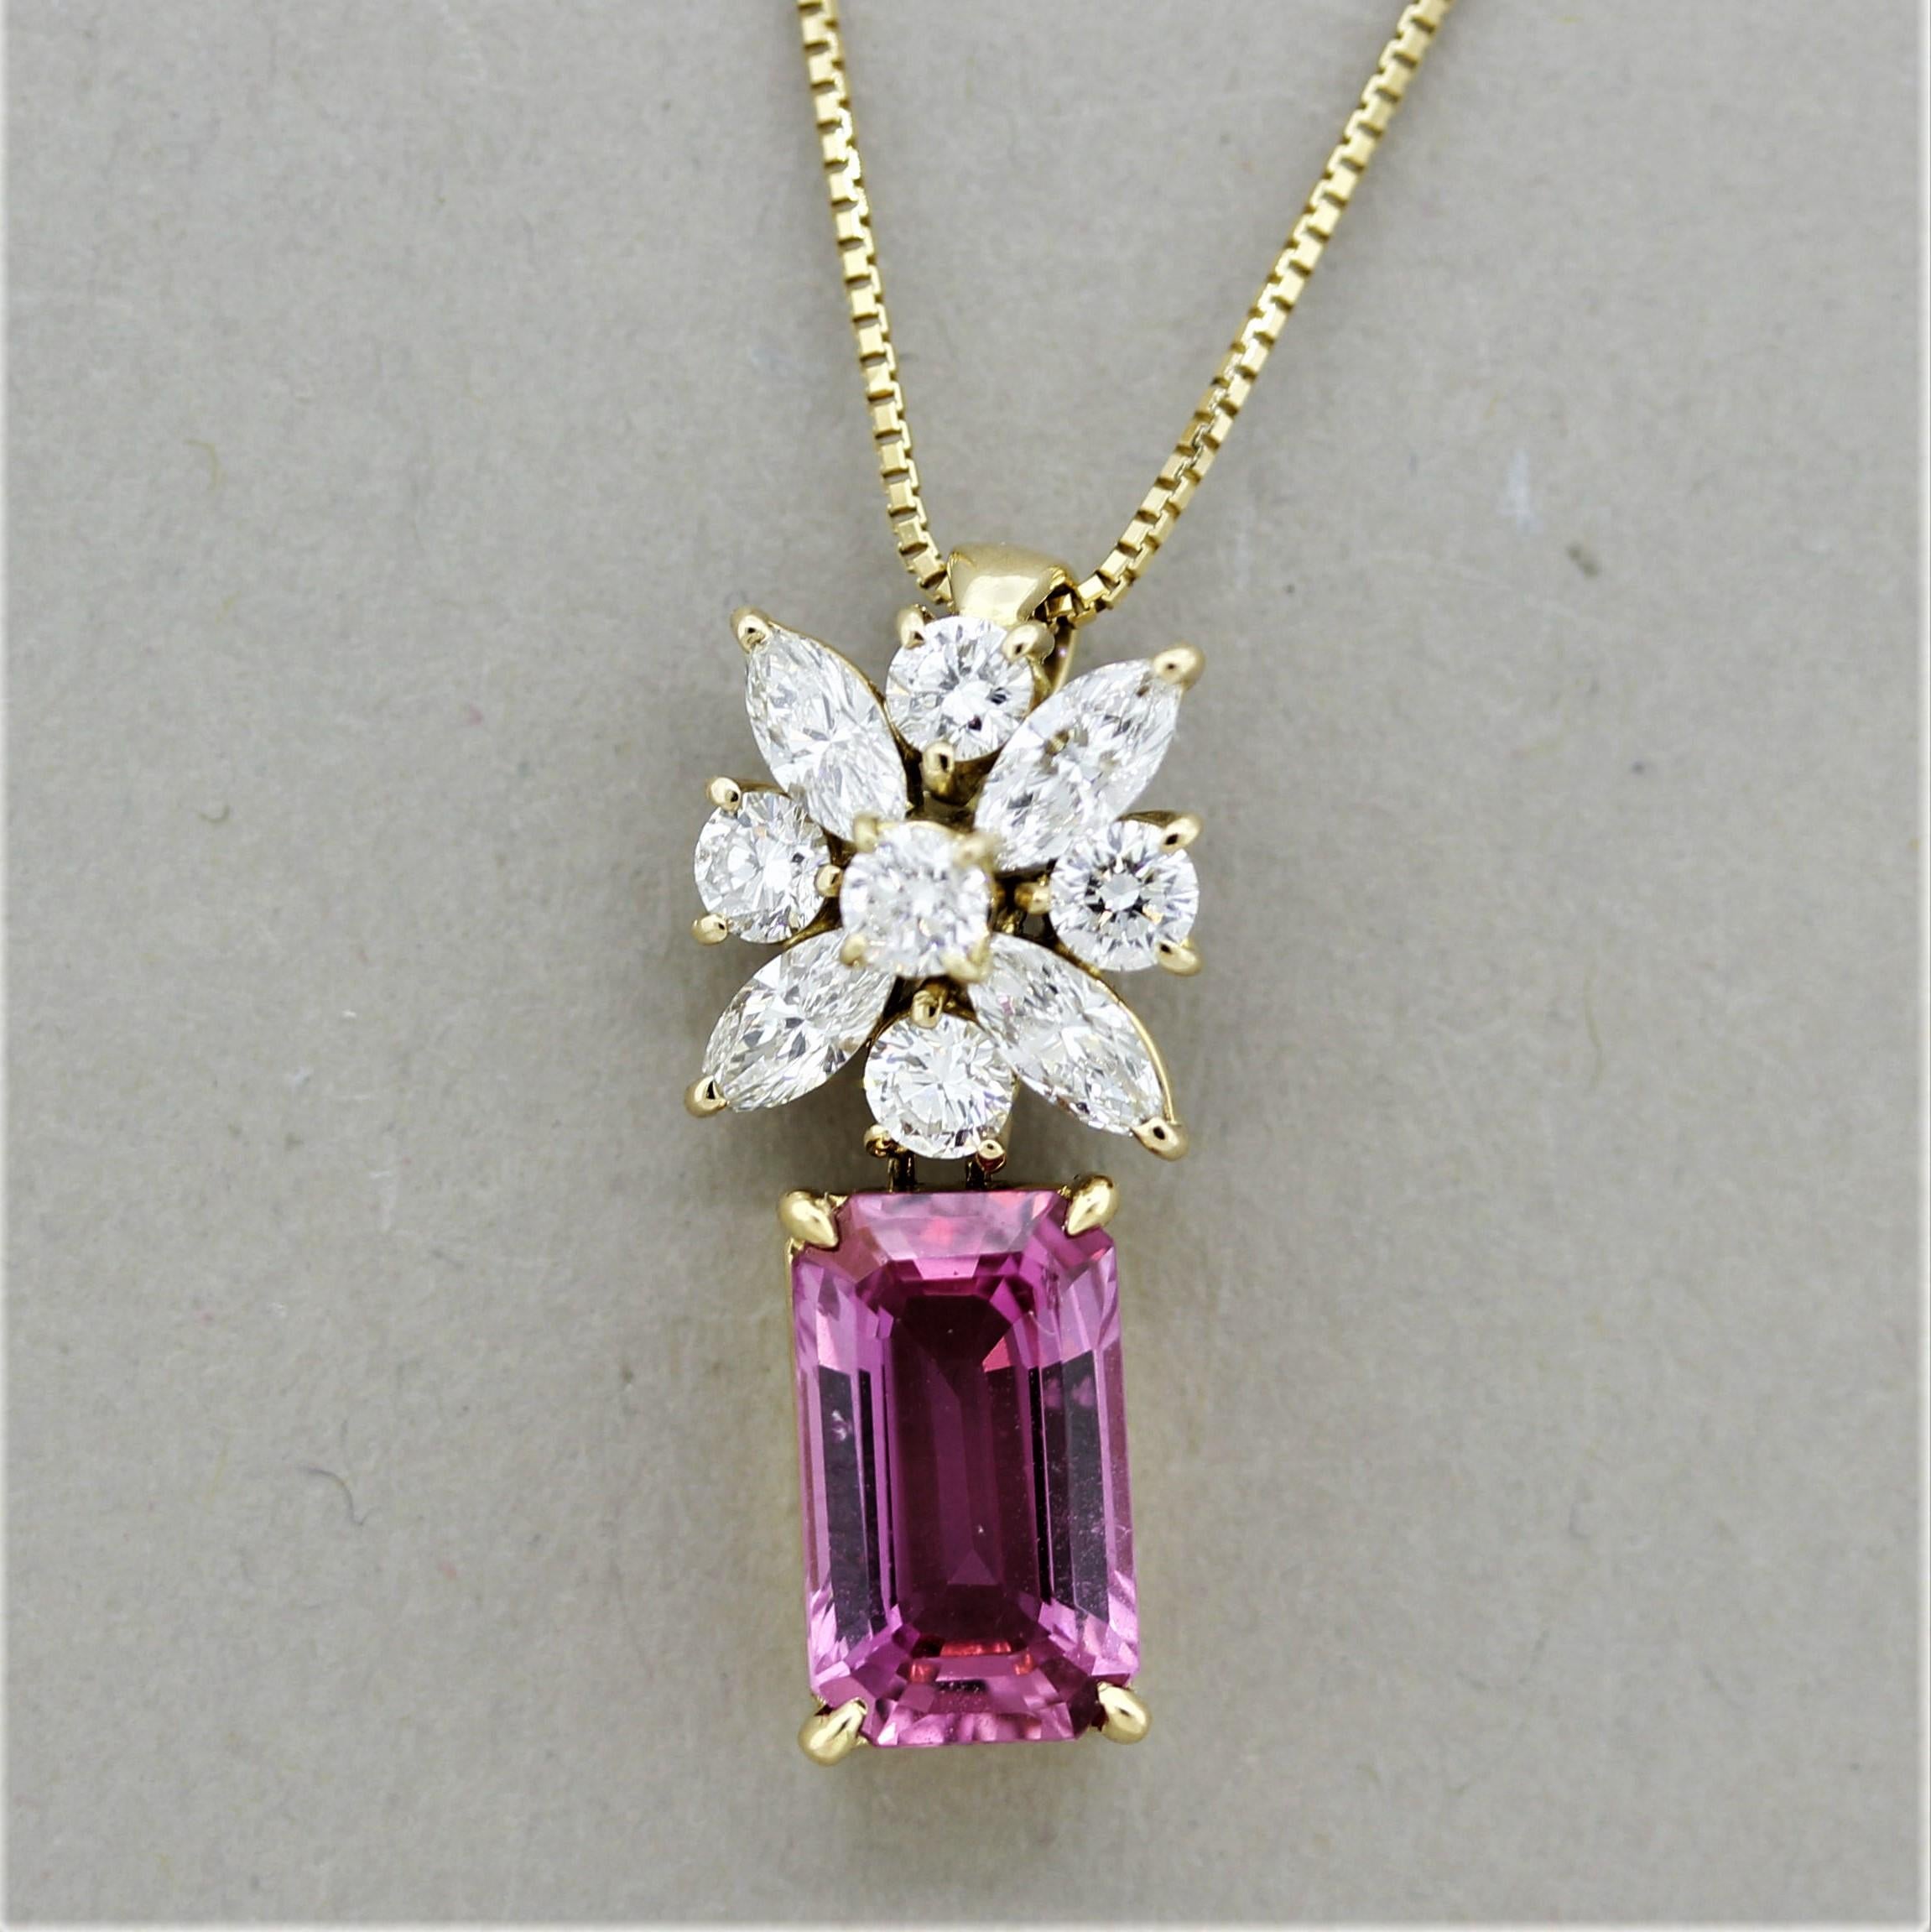 A superb emerald-cut pink sapphire takes center stage! It weighs 2.76 carats and has a bright fine vivid pink color. Adding to that, the sapphire is certified by the GIA as natural with no treatments, something very rare for a sapphire of this color